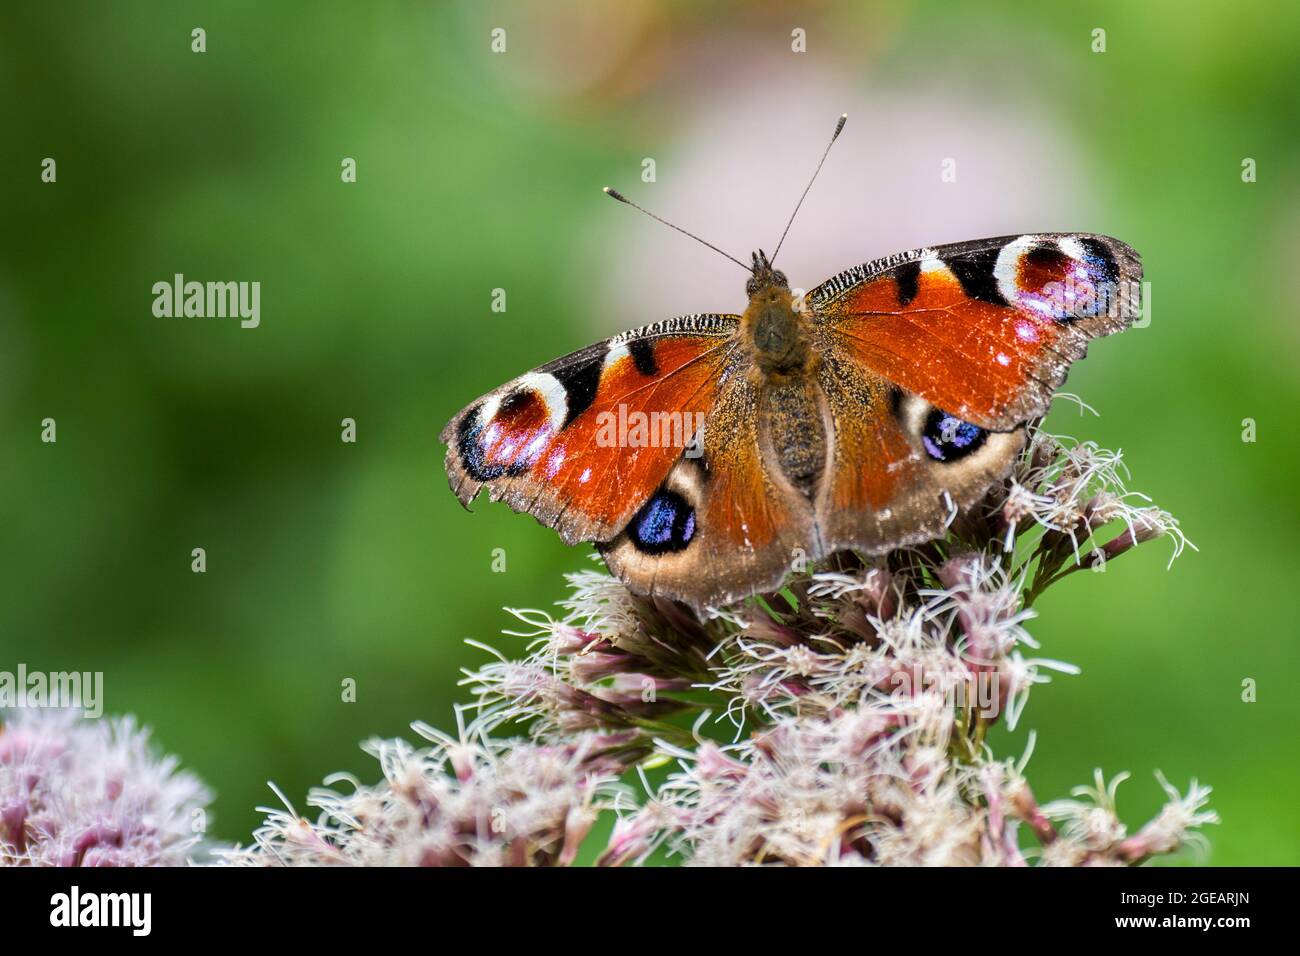 European peacock butterfly (Aglais io / Inachis io) with worn, damaged wings pollinating hemp-agrimony / holy rope flower in summer Stock Photo